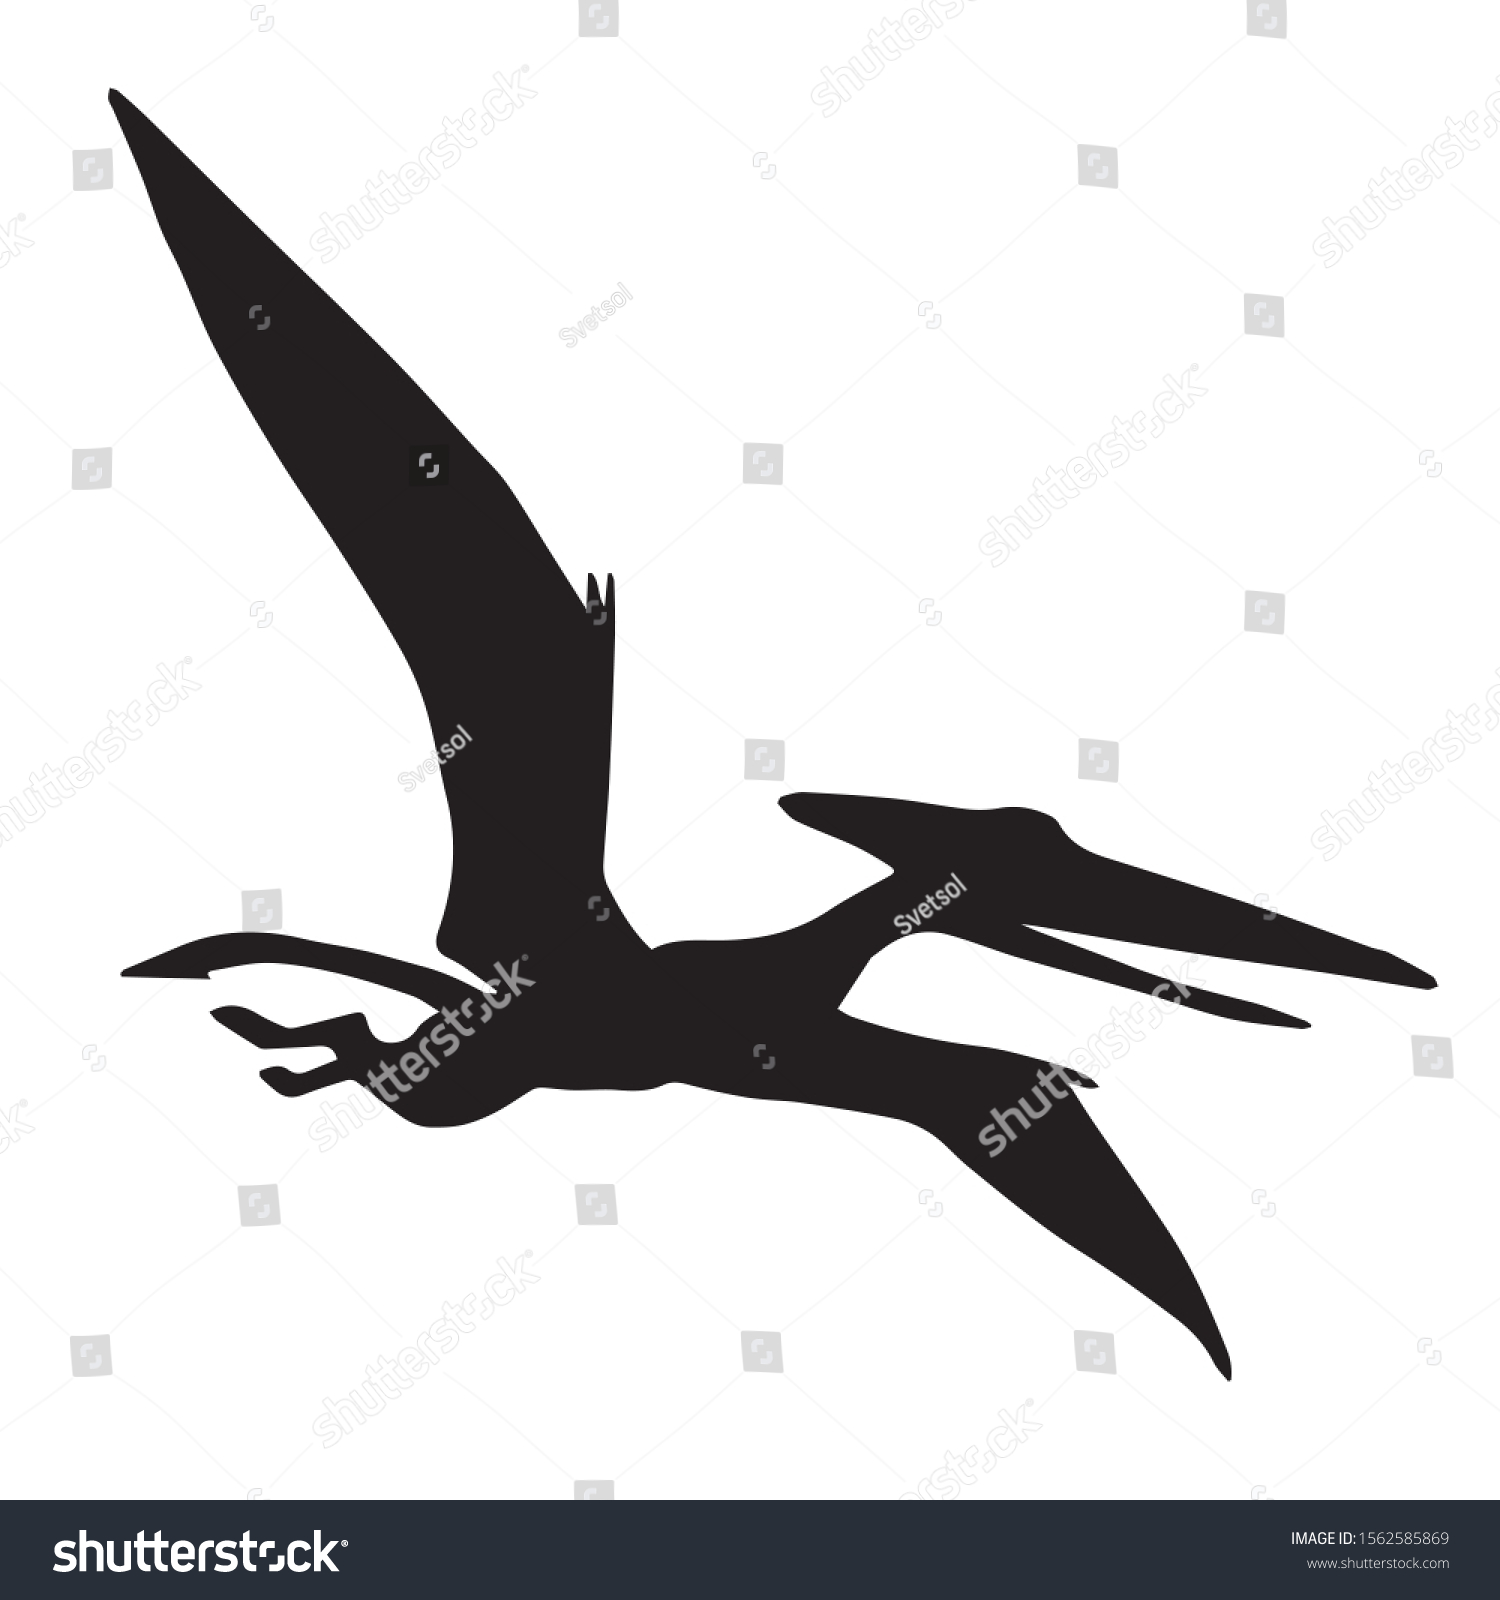 Download Vector Black Flying Pterodactyl Dinosaur Silhouette Stock Vector Royalty Free 1562585869